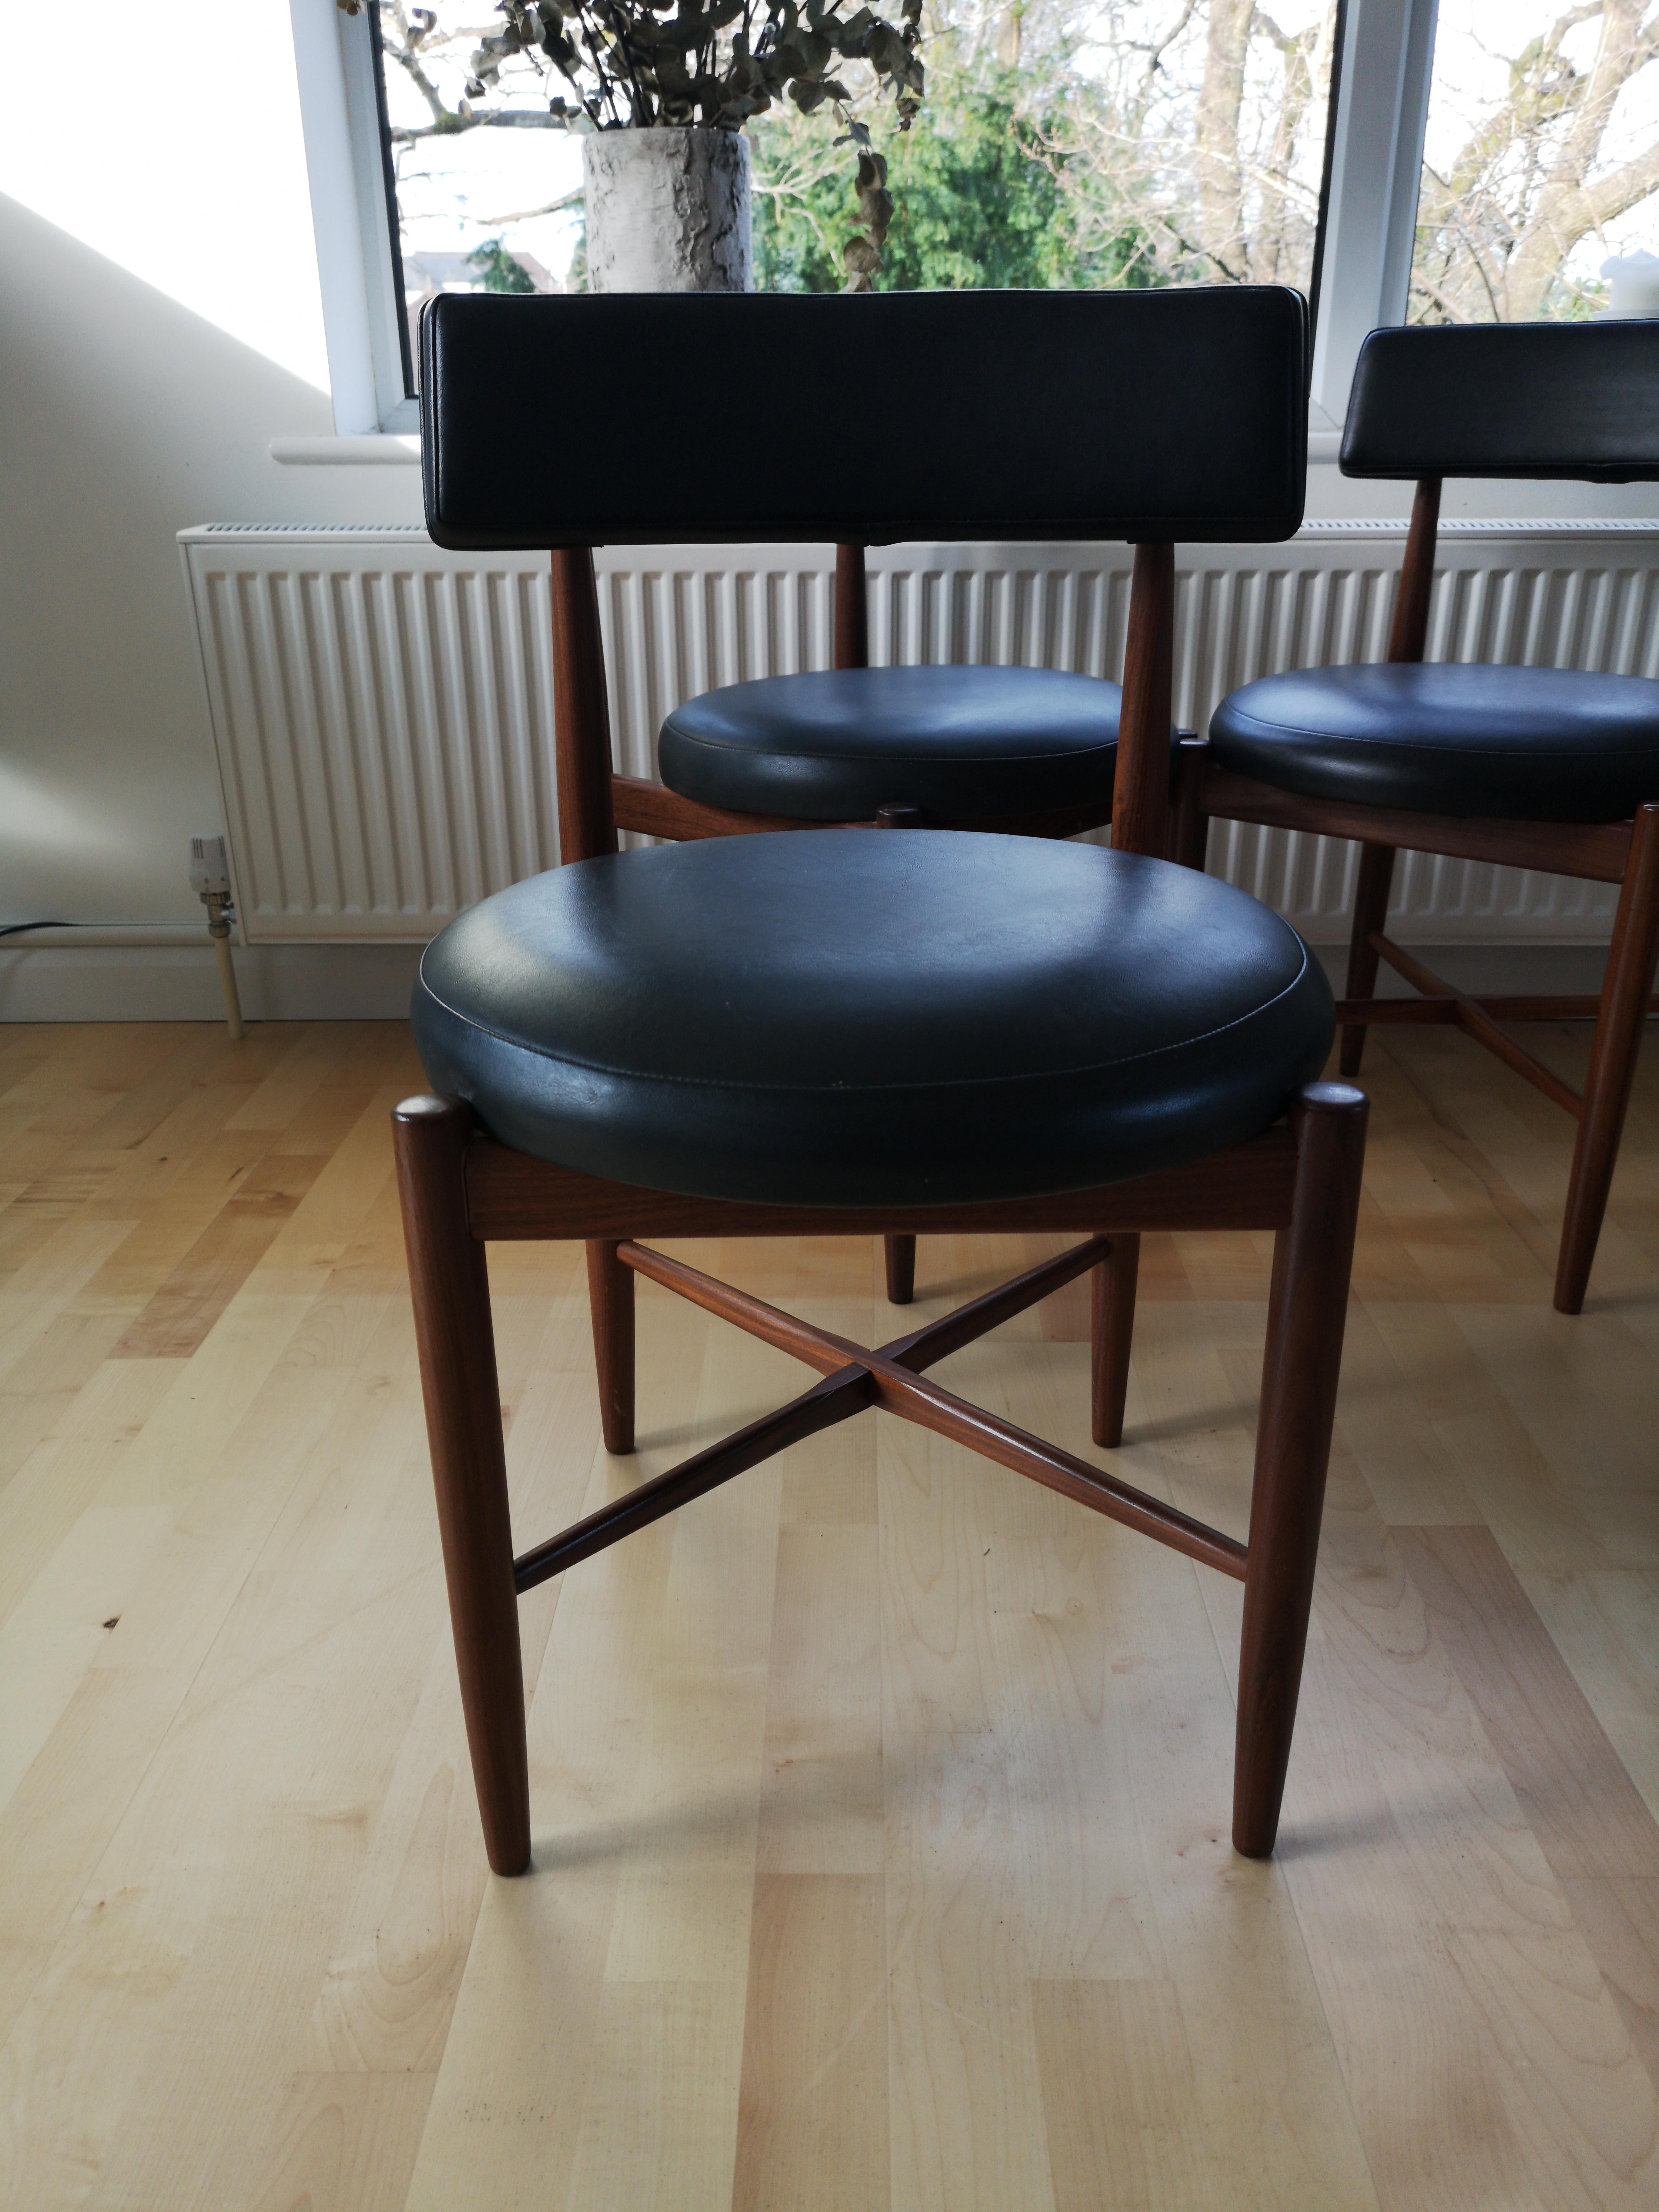 20th Century Midcentury Teak and Black Vinyl Dining Chairs by Victor Wilkins for G-Plan